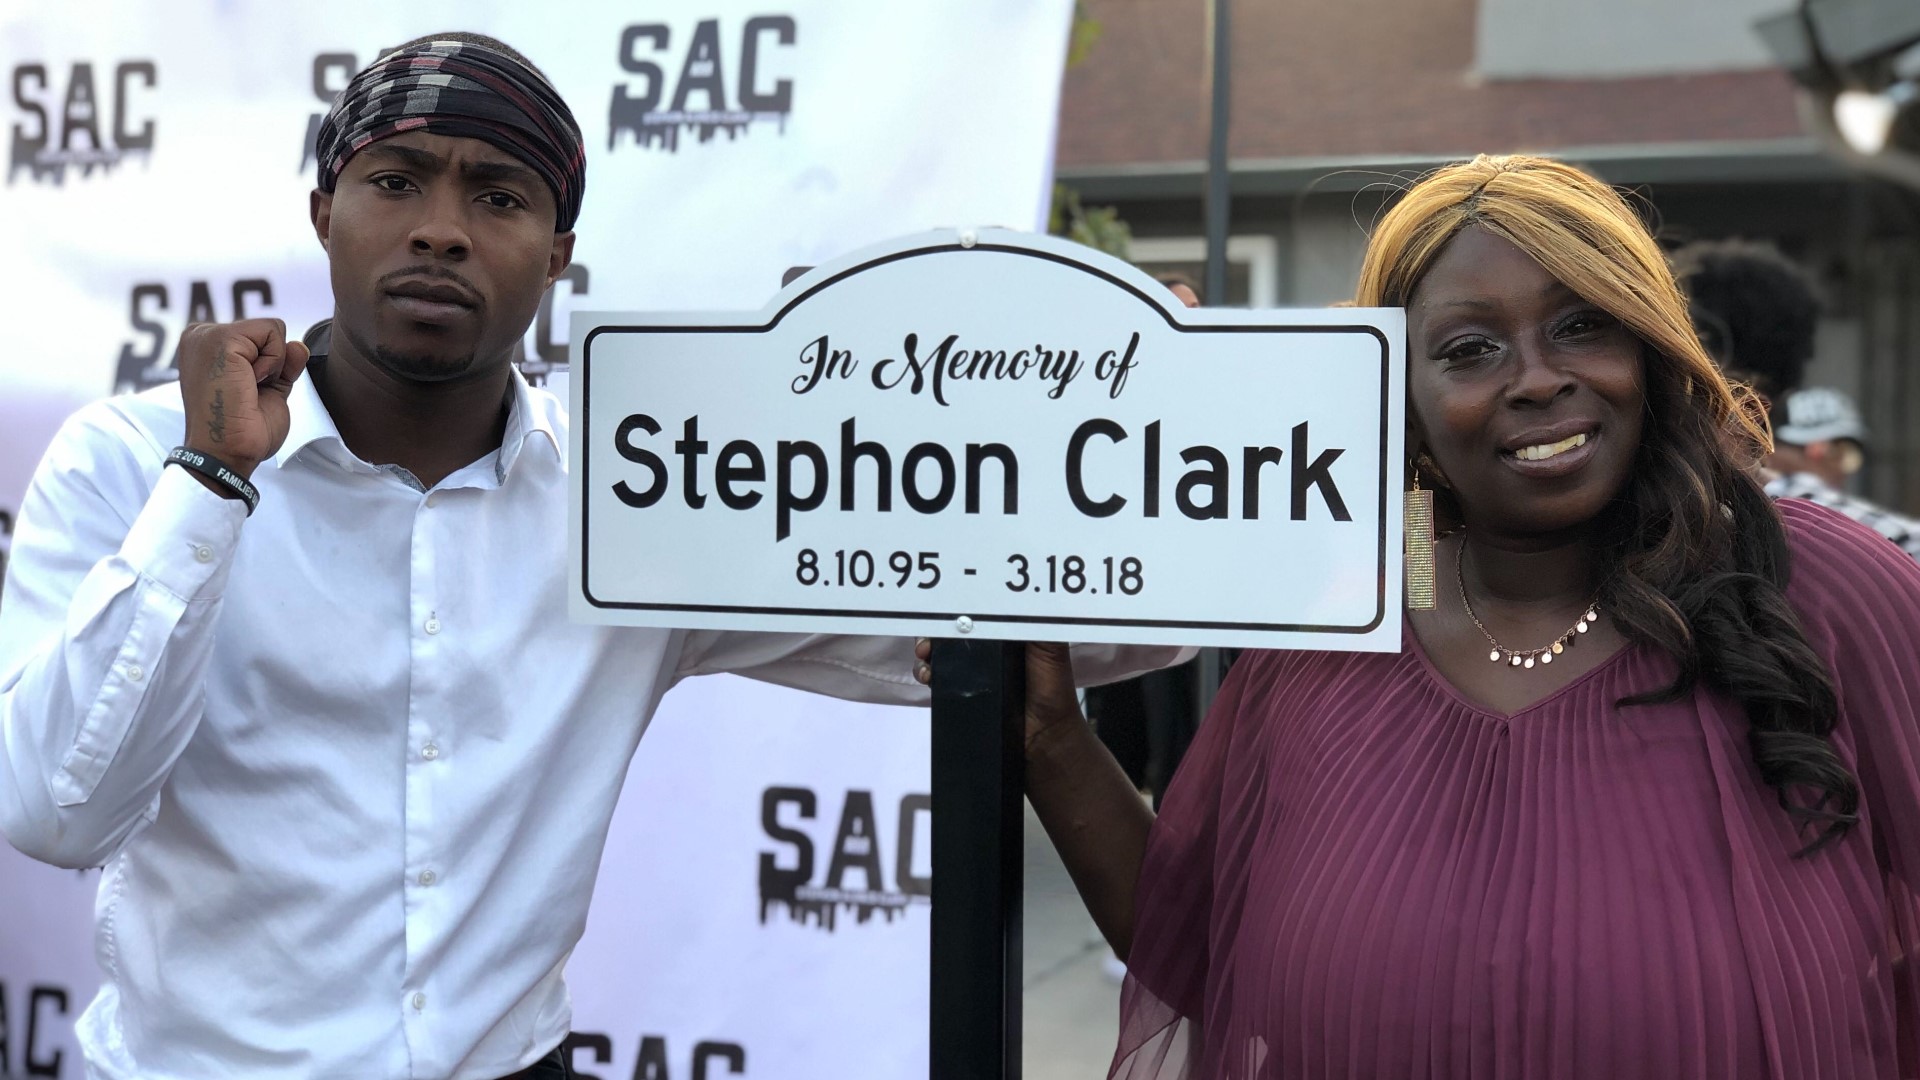 A celebration was underway in the Meadowview area as their first community block party kicked off. A memorial sign was revealed honoring Stephon Clark.